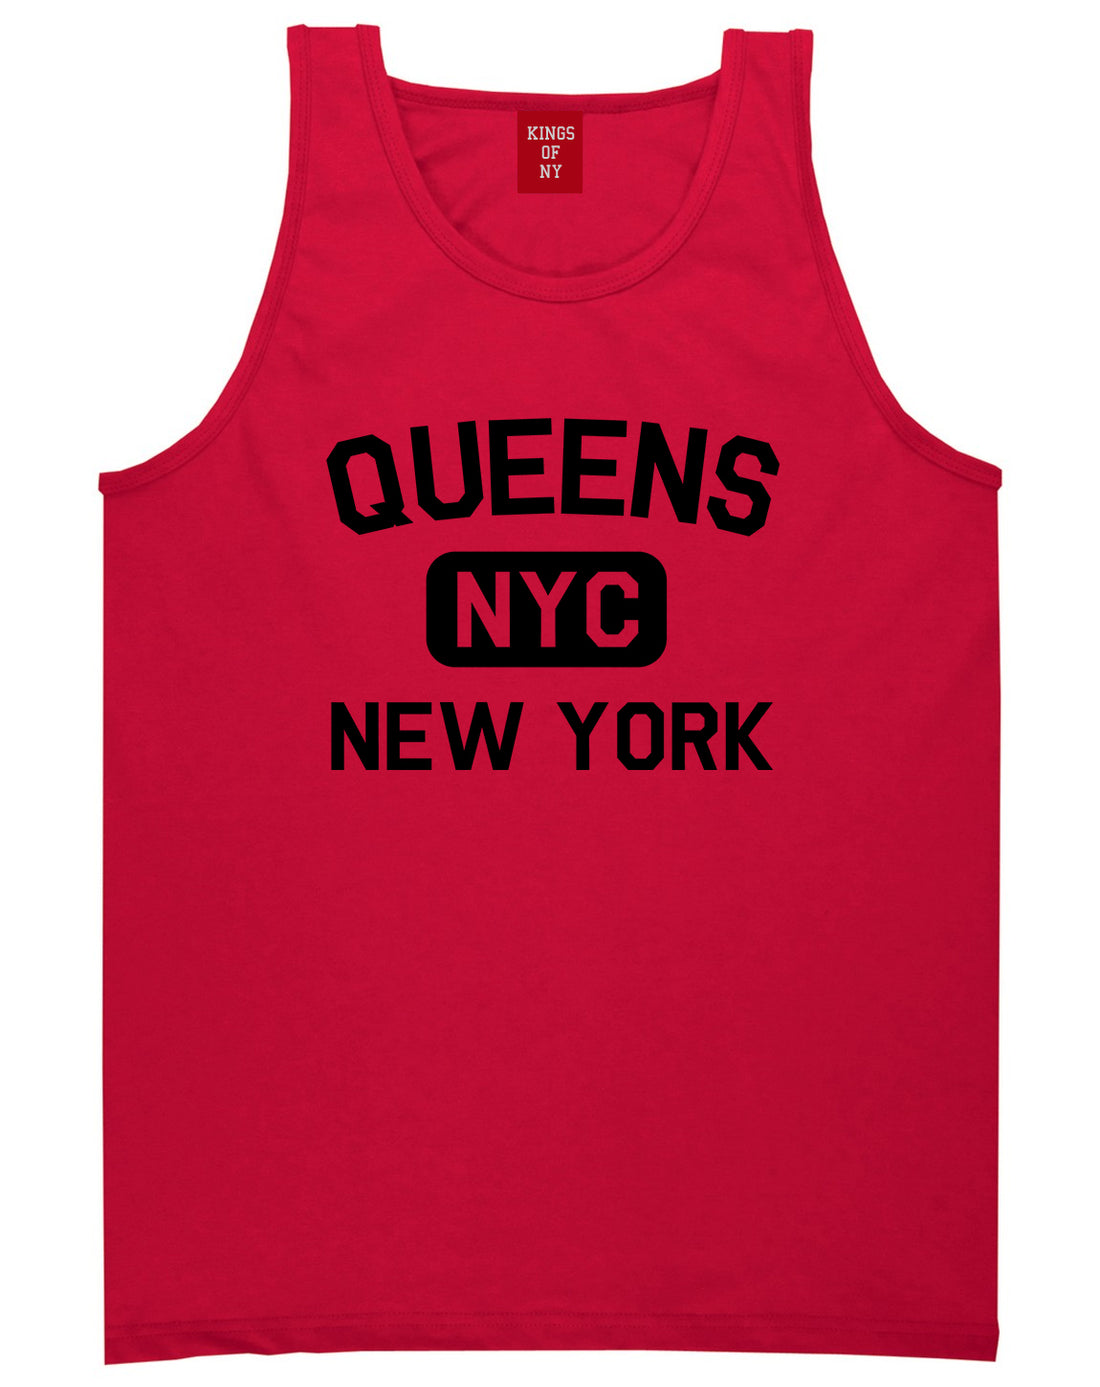 Queens Gym NYC New York Mens Tank Top T-Shirt Red